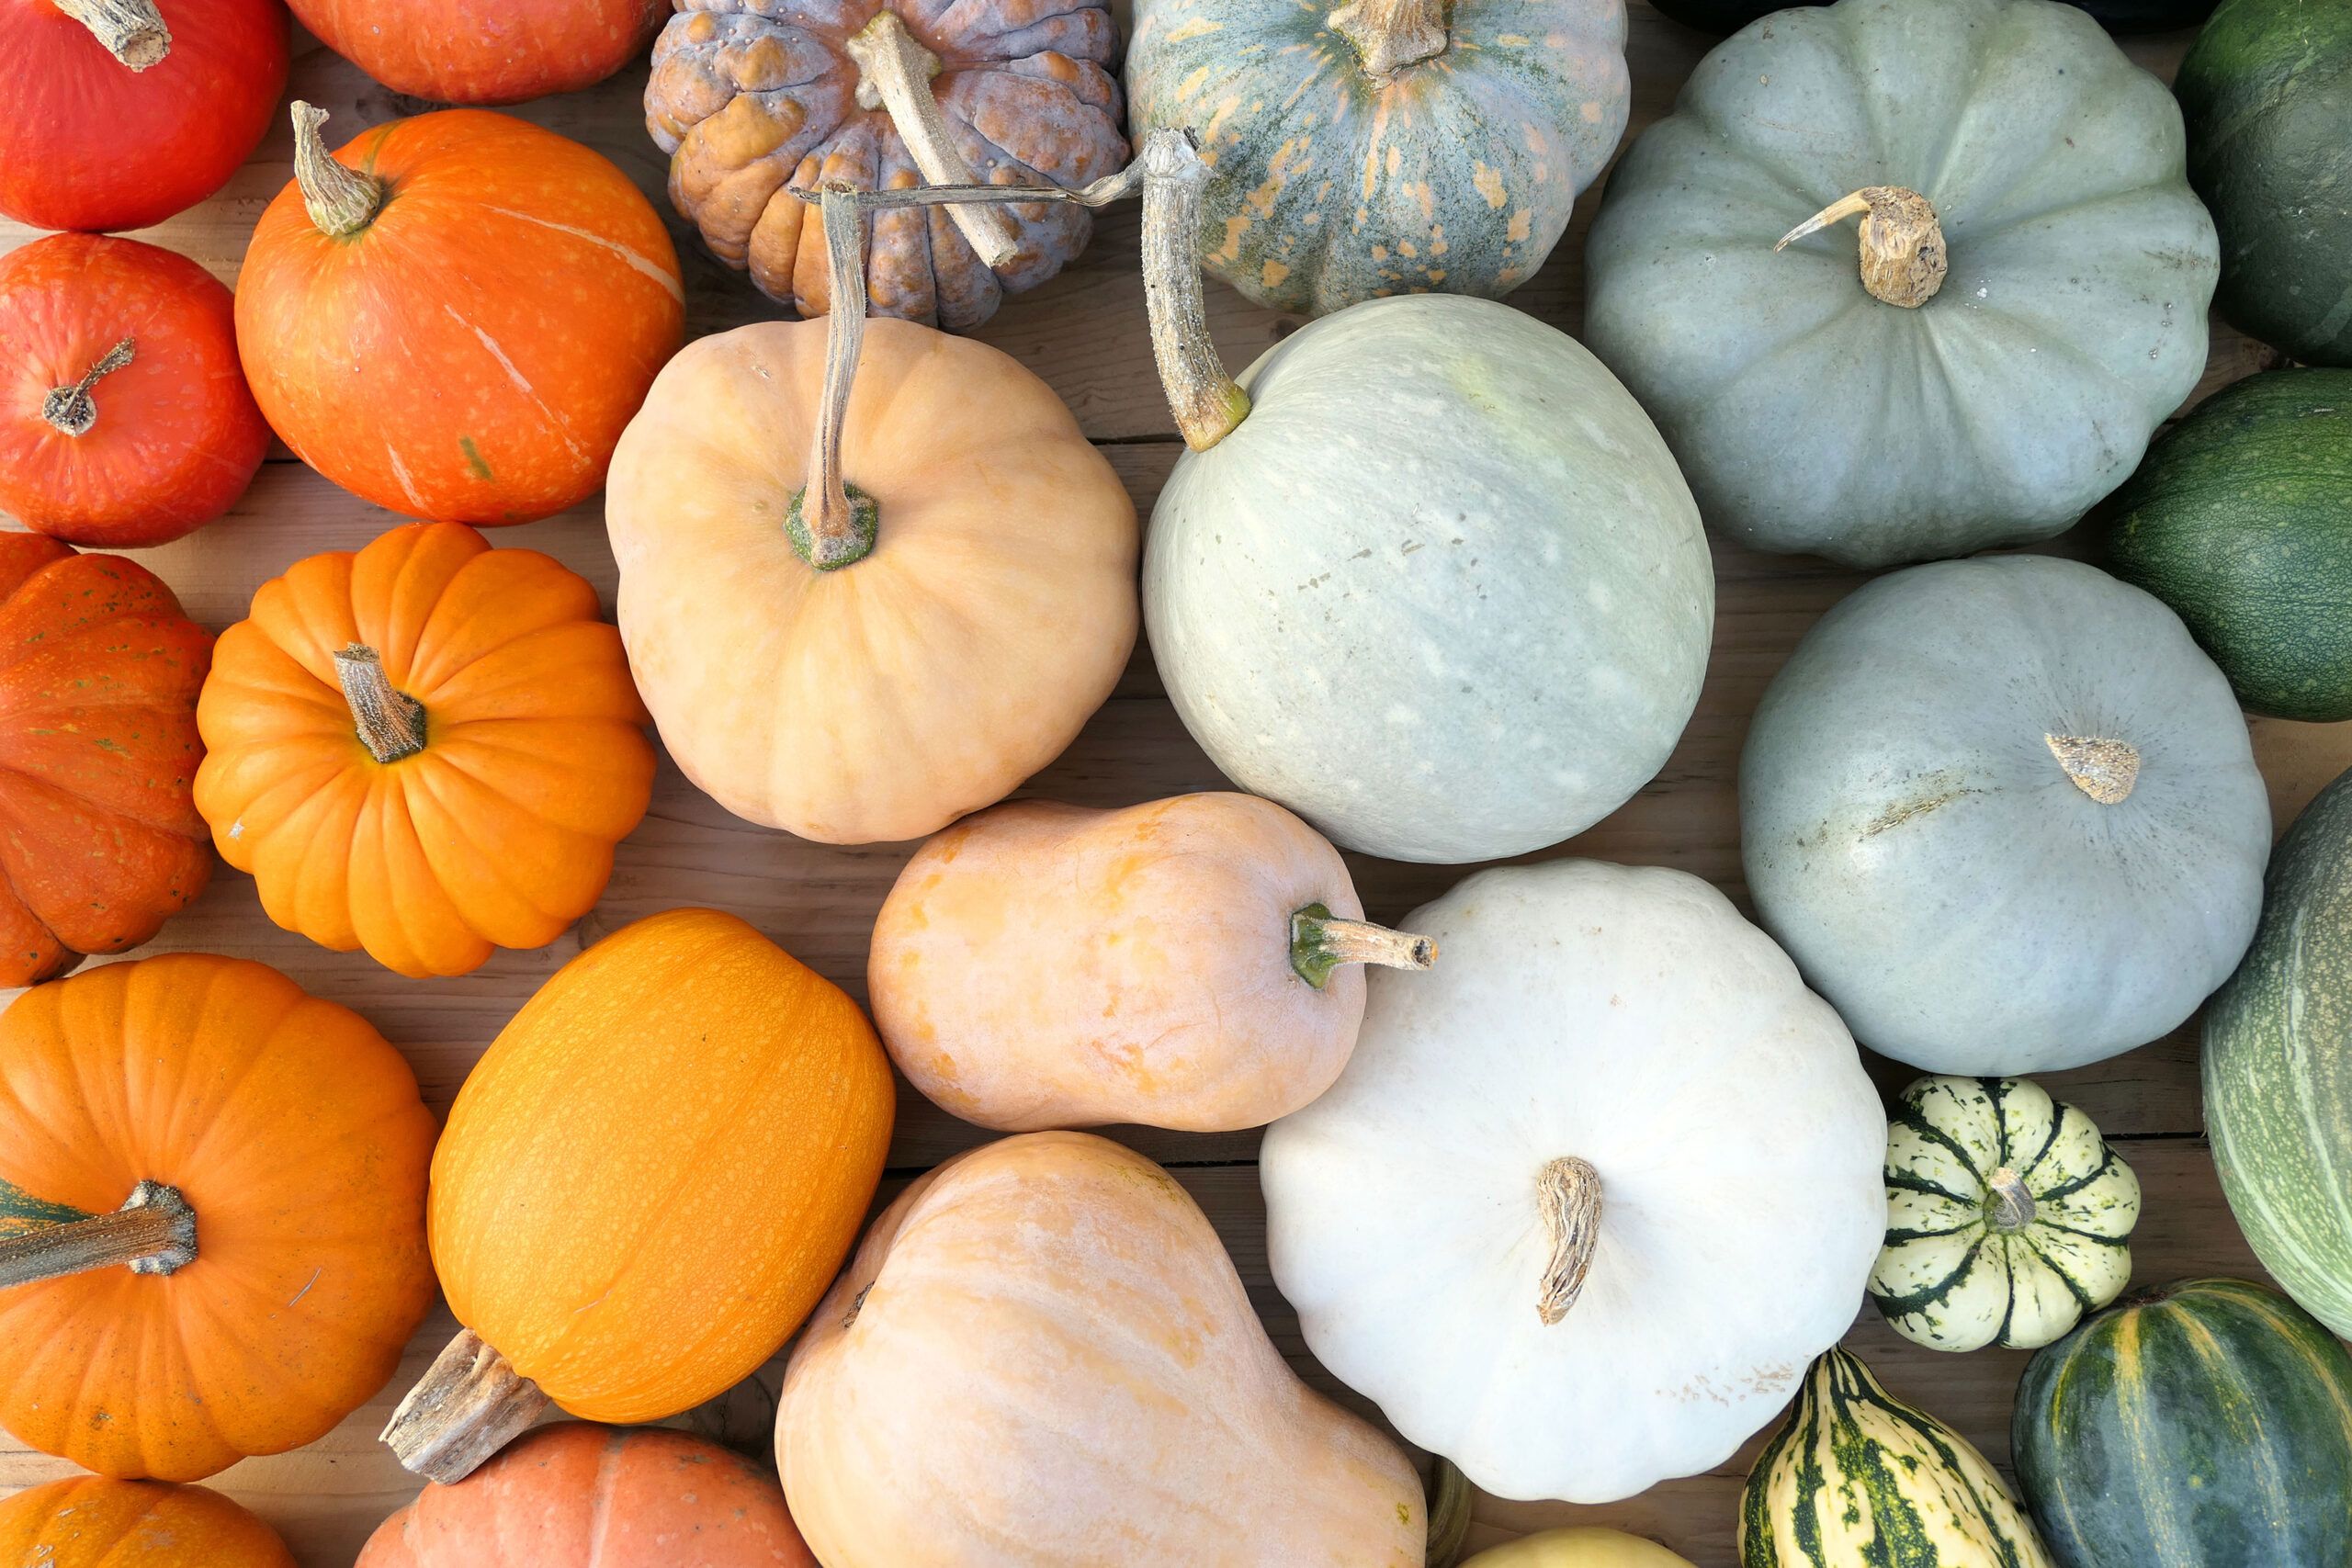 A variety of pumpkins in different colors